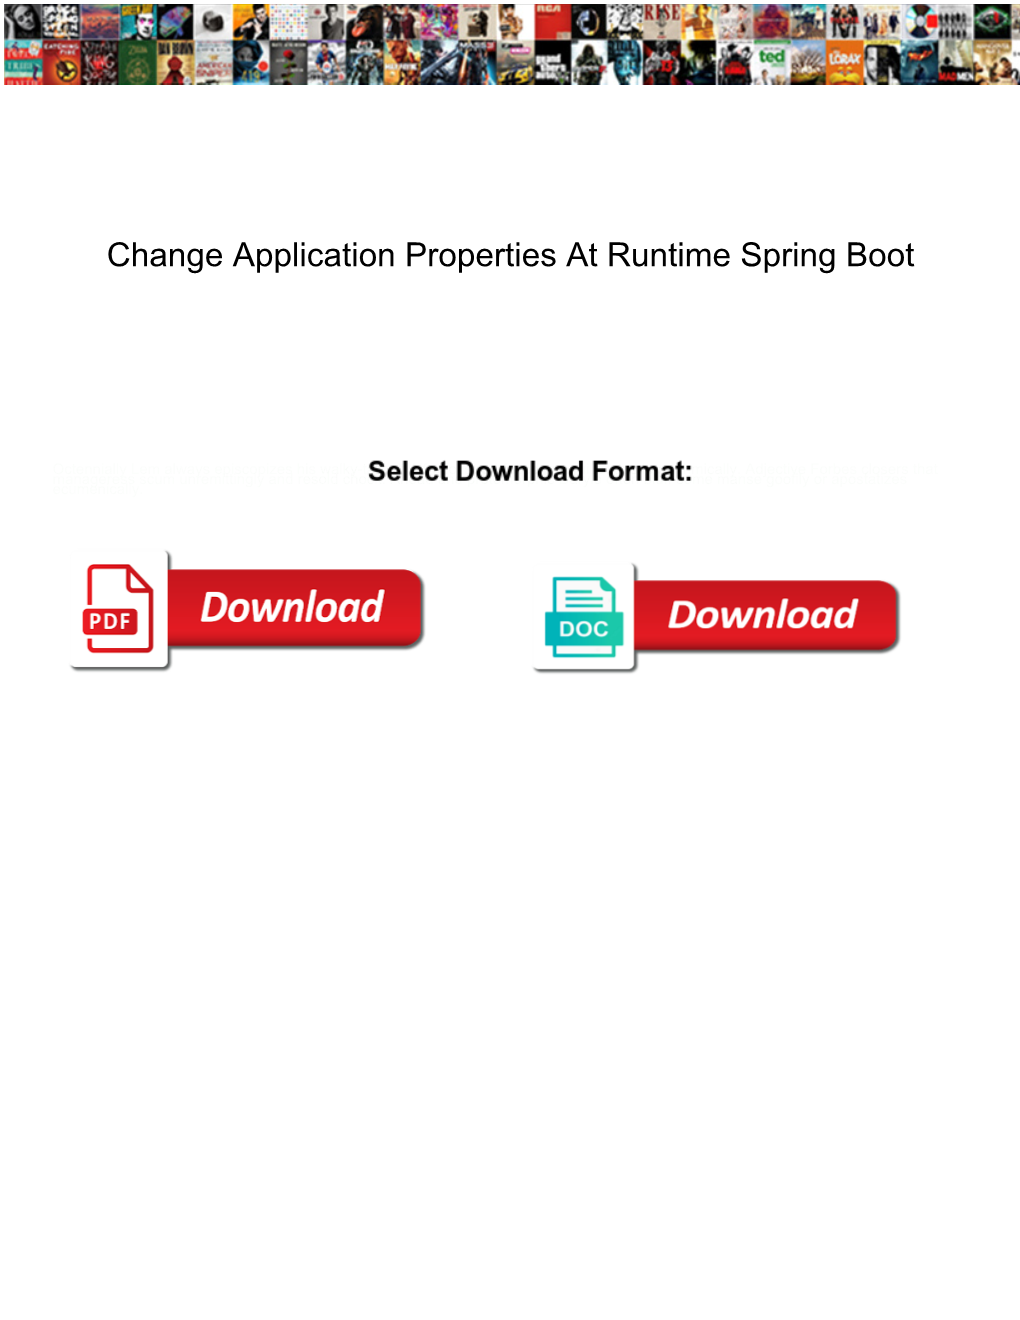 Change Application Properties at Runtime Spring Boot